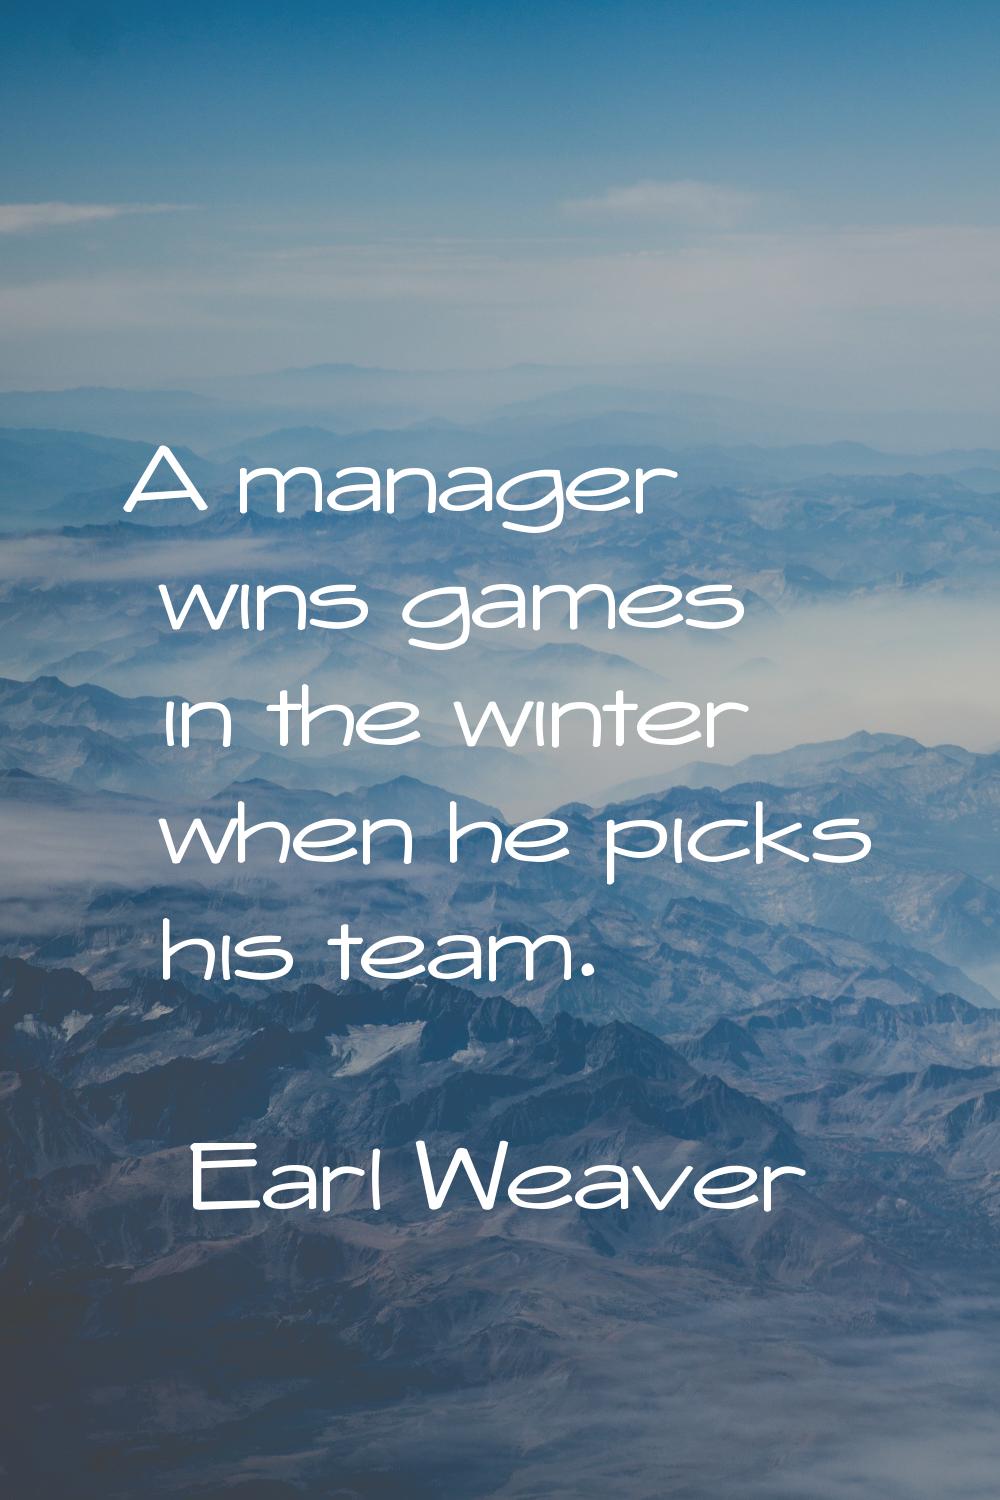 A manager wins games in the winter when he picks his team.